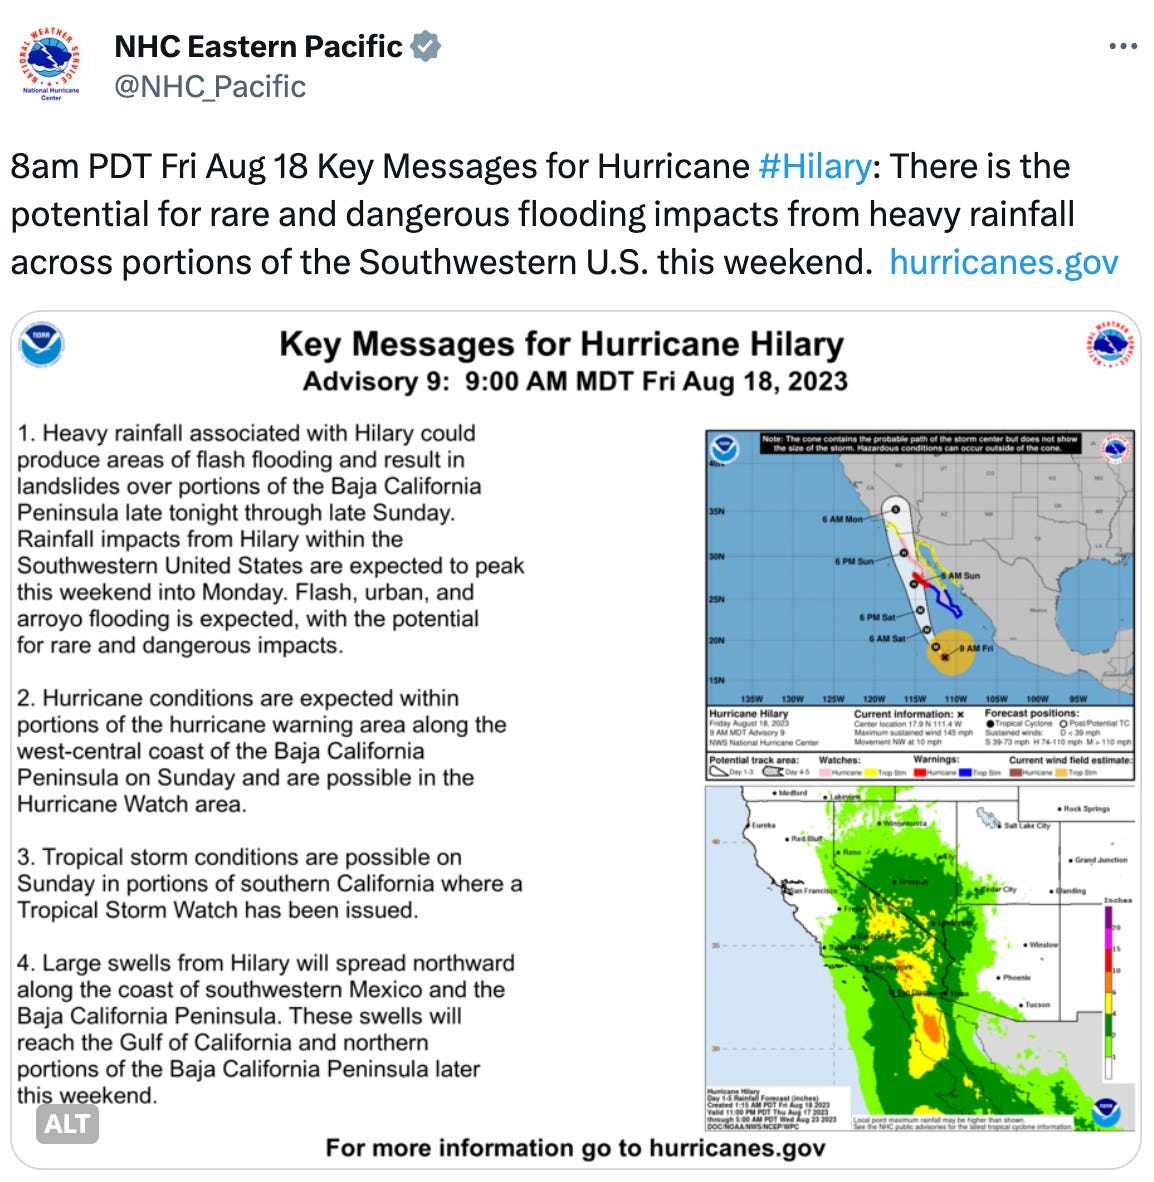  NHC Eastern Pacific @NHC_Pacific 8am PDT Fri Aug 18 Key Messages for Hurricane #Hilary: There is the potential for rare and dangerous flooding impacts from heavy rainfall across portions of the Southwestern U.S. this weekend.  http://hurricanes.gov 1. Heavy rainfall associated with Hilary could produce areas of flash flooding and result in landslides over portions of the Baja California Peninsula late tonight through late Sunday.  Rainfall impacts from Hilary within the Southwestern United States are expected to peak this weekend into Monday. Flash, urban, and arroyo flooding is expected, with the potential for rare and dangerous impacts.  2. Hurricane conditions are expected within portions of the hurricane warning area along the west-central coast of the Baja California Peninsula on Sunday and are possible in the Hurricane Watch area.  3. Tropical storm conditions are possible on Sunday in portions of southern California where a Tropical Storm Watch has been issued.  4. Large swells from Hilary will spread northward along the coast of southwestern Mexico and the Baja California Peninsula.  These swells will reach the Gulf of California and northern portions of the Baja California Peninsula later this weekend.